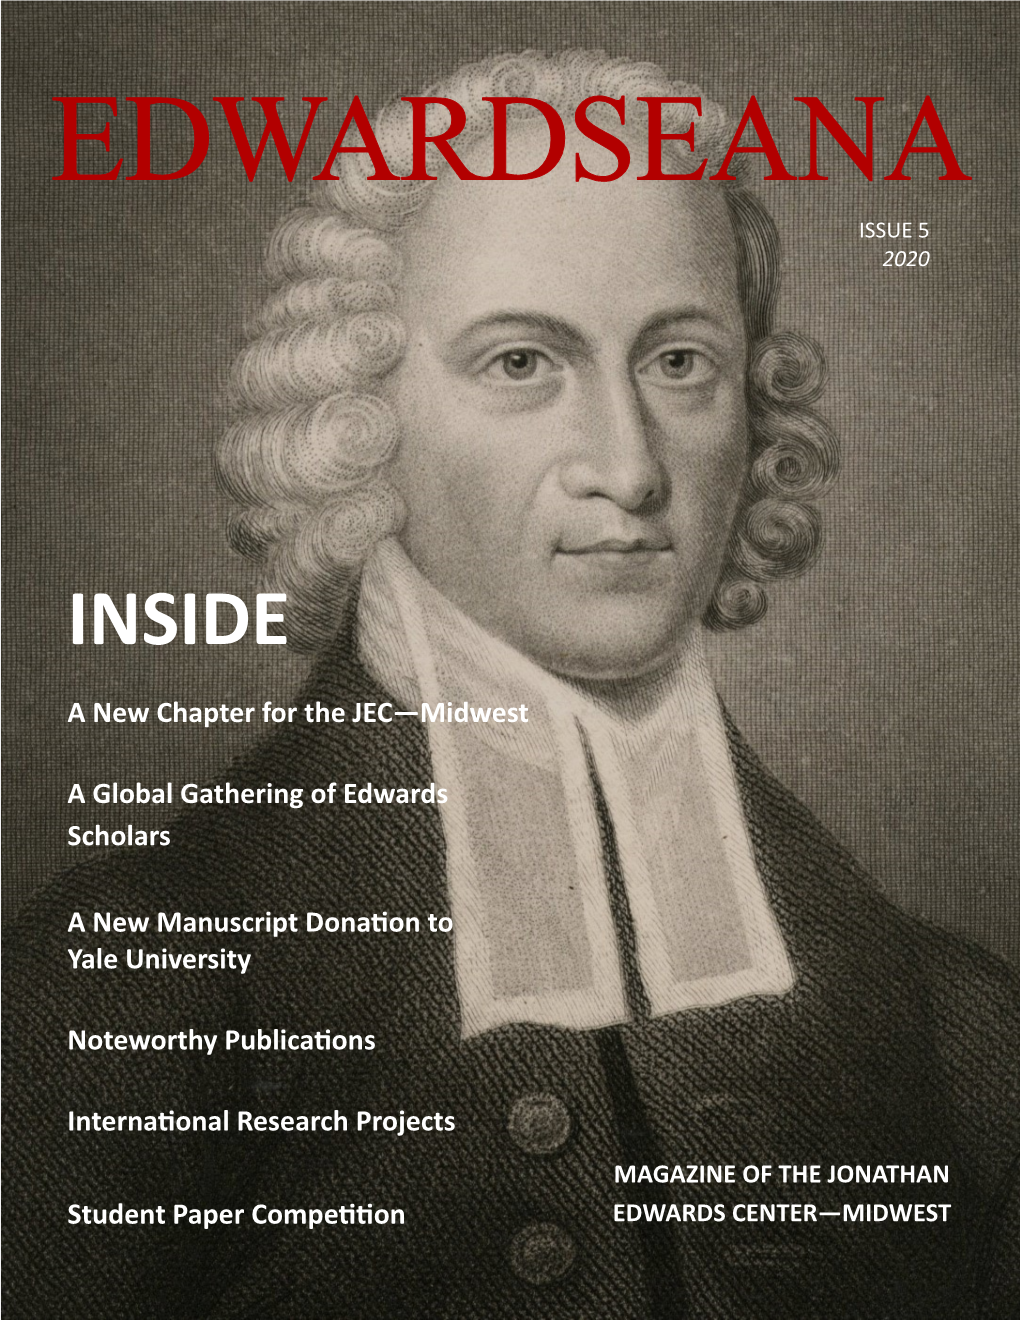 The Jonathan Edwards Center at Trinity Evangelical Divinity School (TEDS) to Puritan Reformed Theological Seminary (PRTS) Aims for Continuity and Expansion